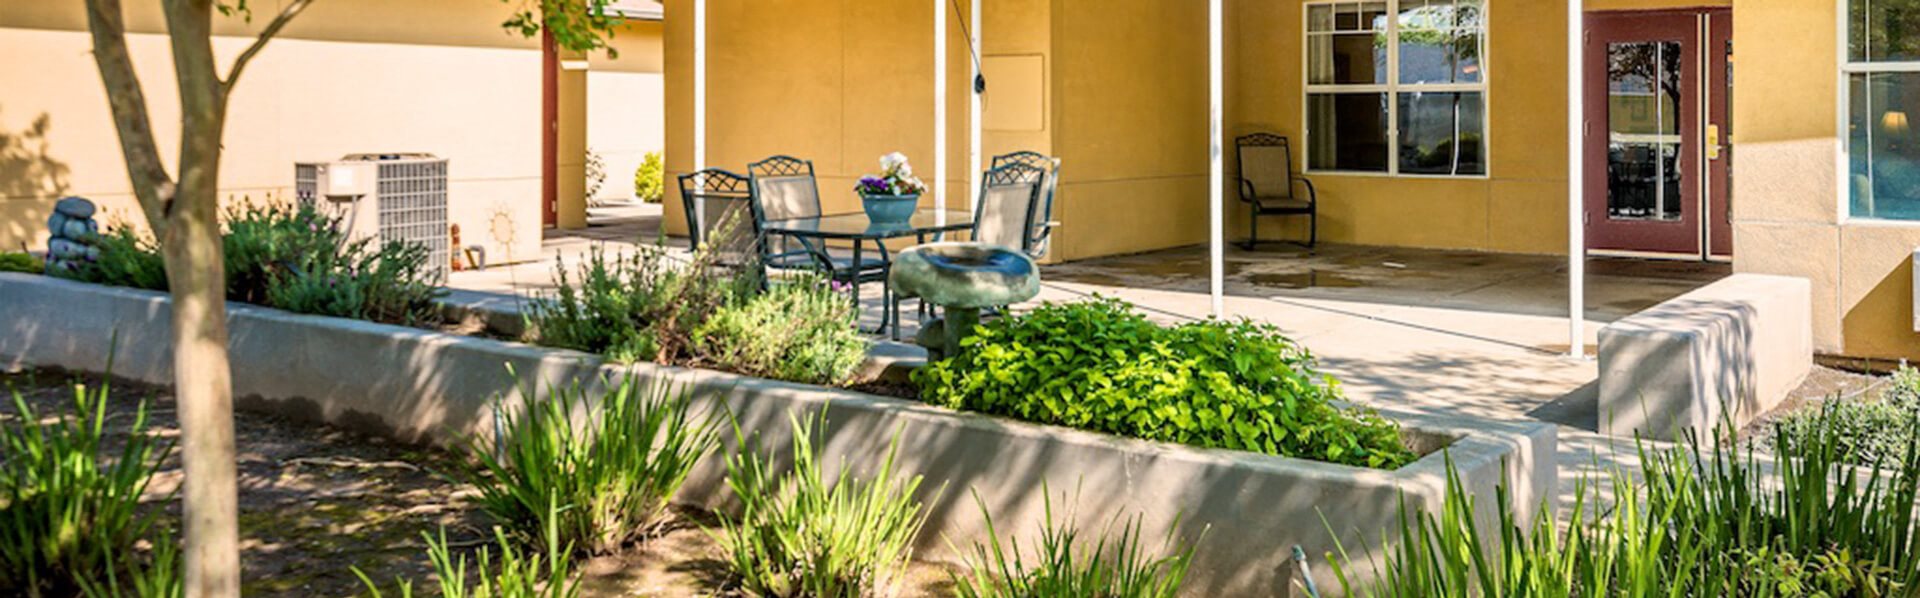 Immaculate landscaping at Pacifica Senior Living Modesto, California, 95355